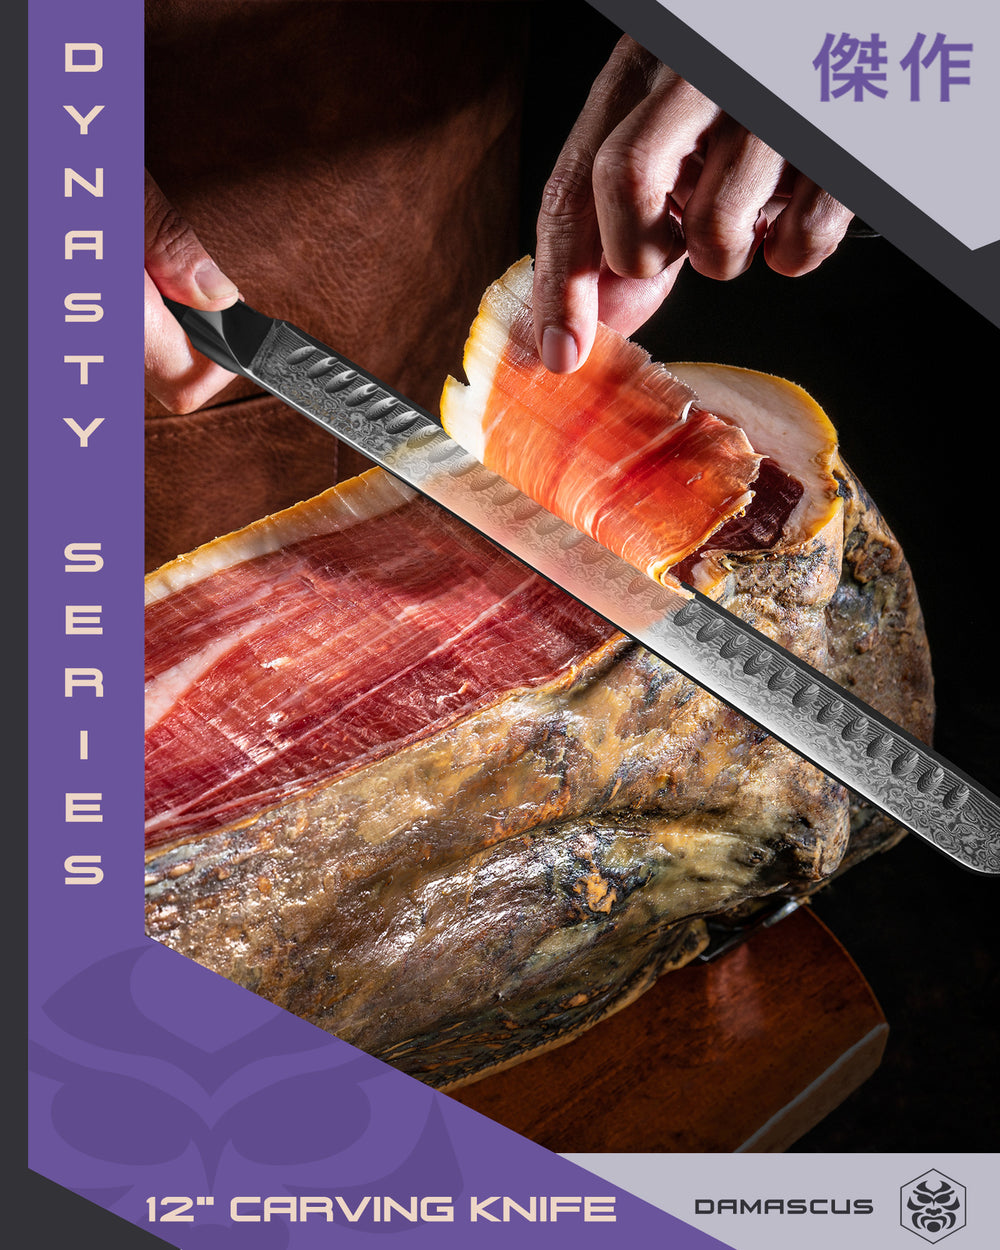 The Dynasty Damascus Carving Knife being used to slice thing cuts of jamon